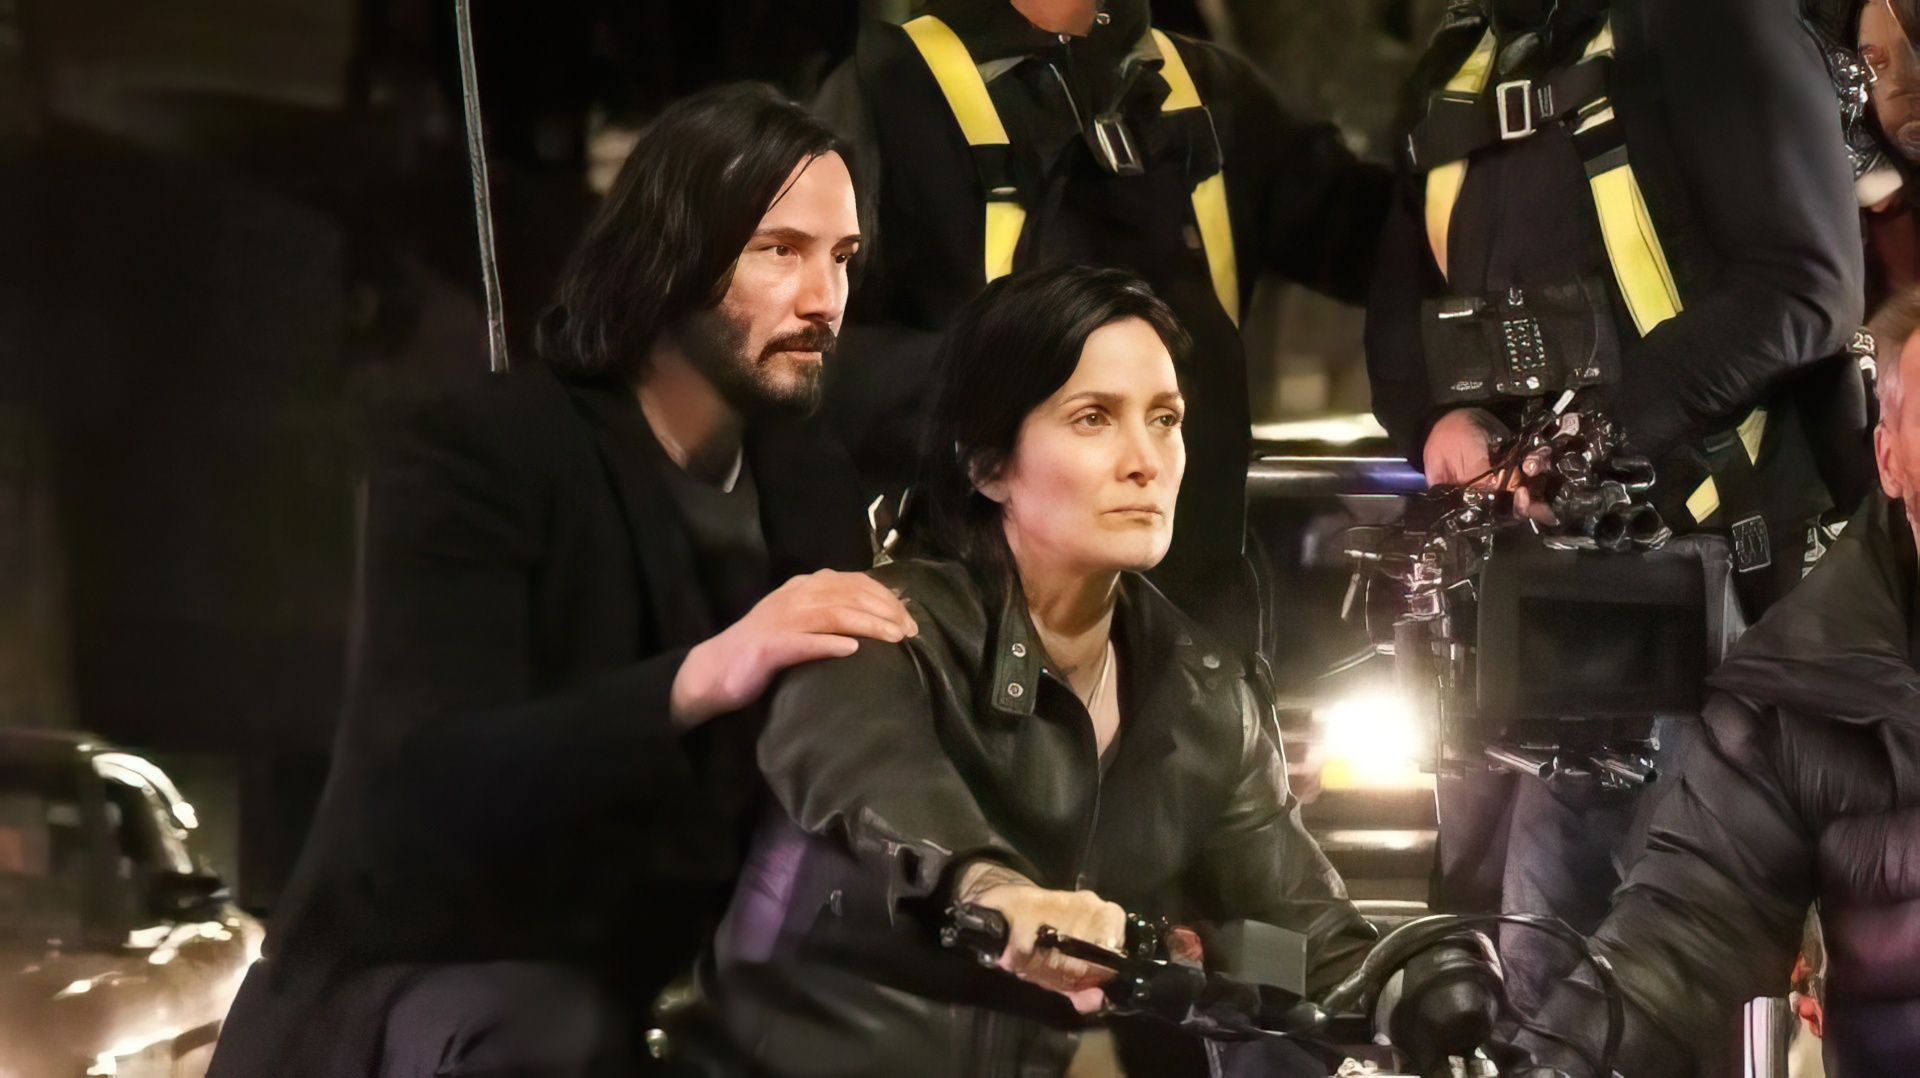 Carrie-Anne Moss and Keanu Reeves on the set of the fourth Matrix